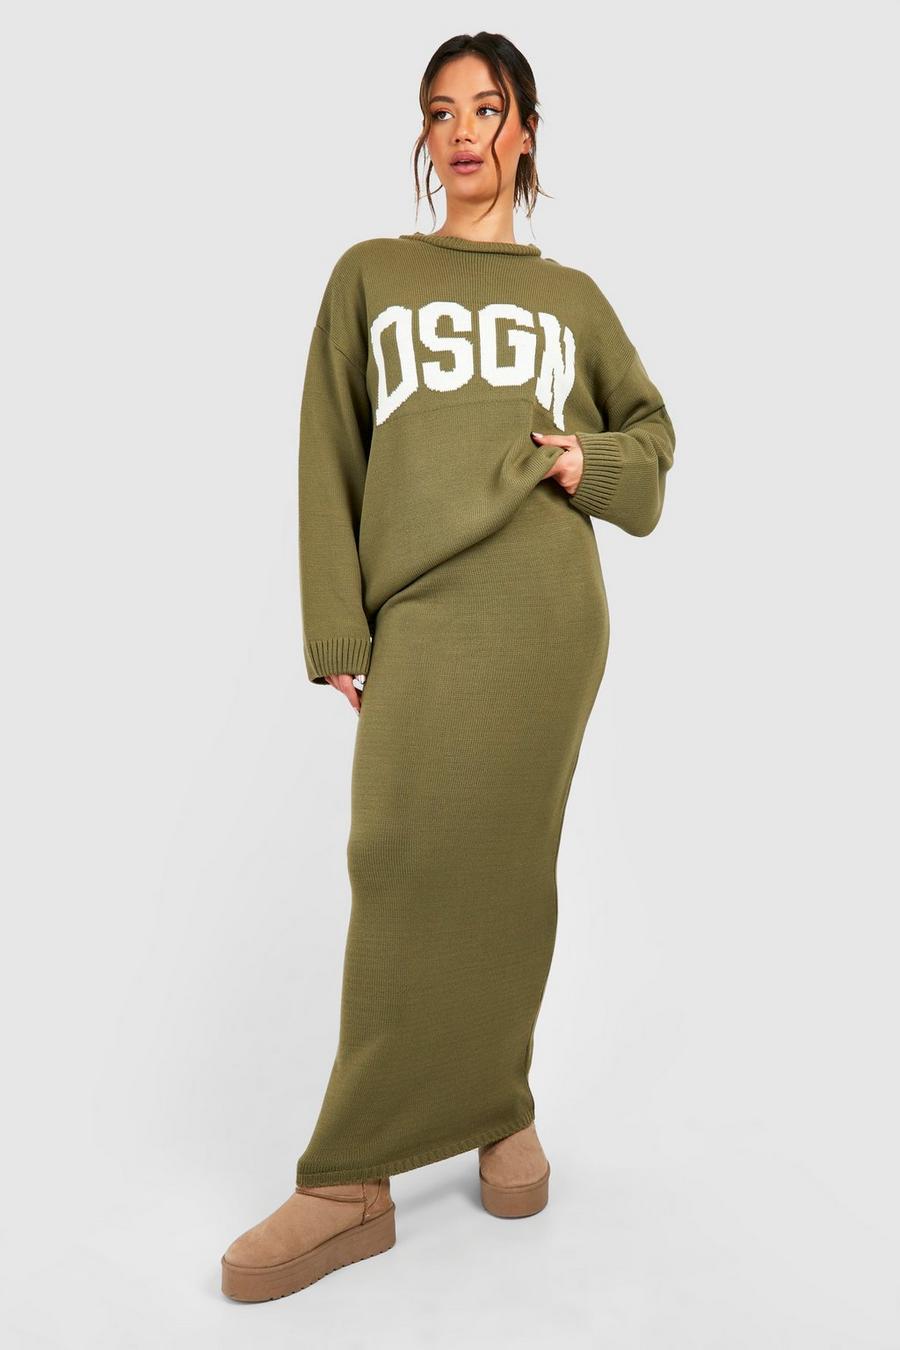 Khaki Dsgn Crew Neck Knitted Jumper And Maxi Skirt Set